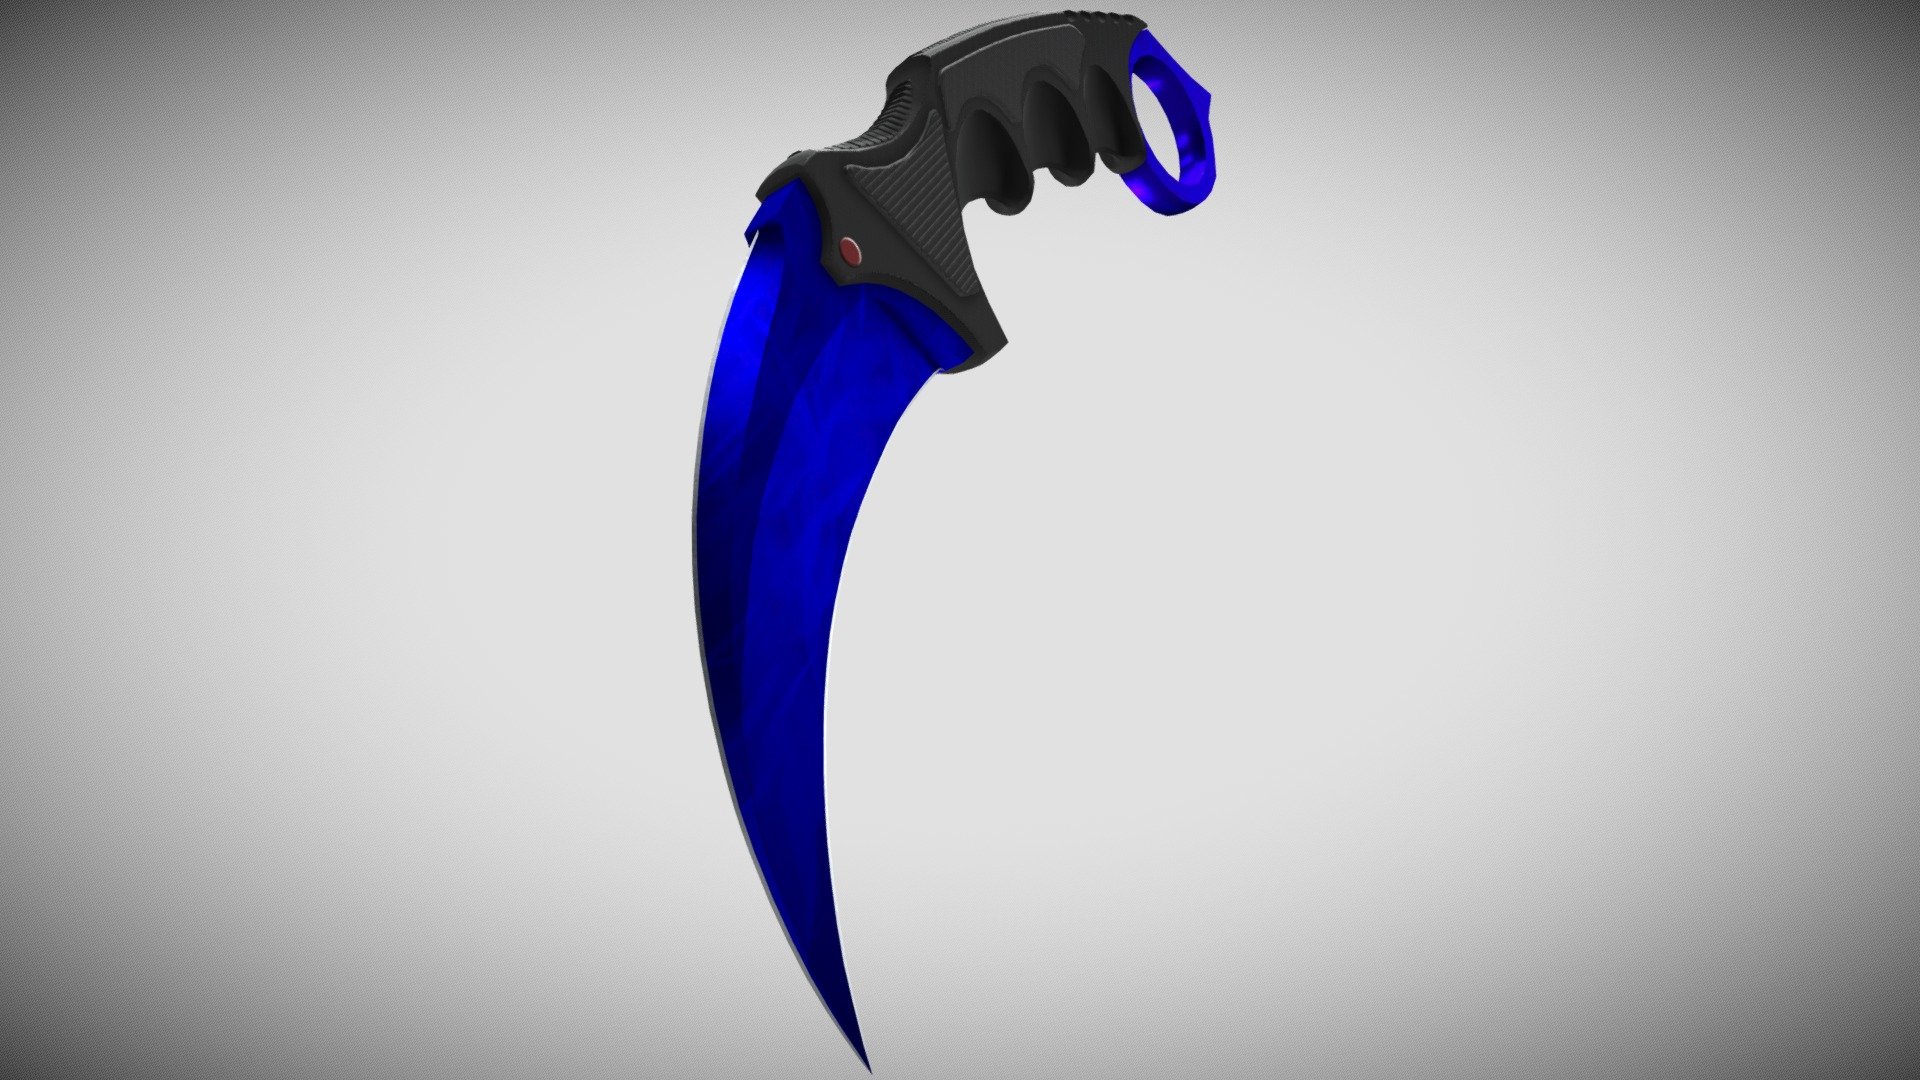 Karambit Knife from CS:GO with sapphire pattern Model made in Autodesk MAYA, textured and rendered in Substance Painter - Karambit Knife Sapphire - Buy Royalty Free 3D model by P7PO (@PiPo07) 3d model